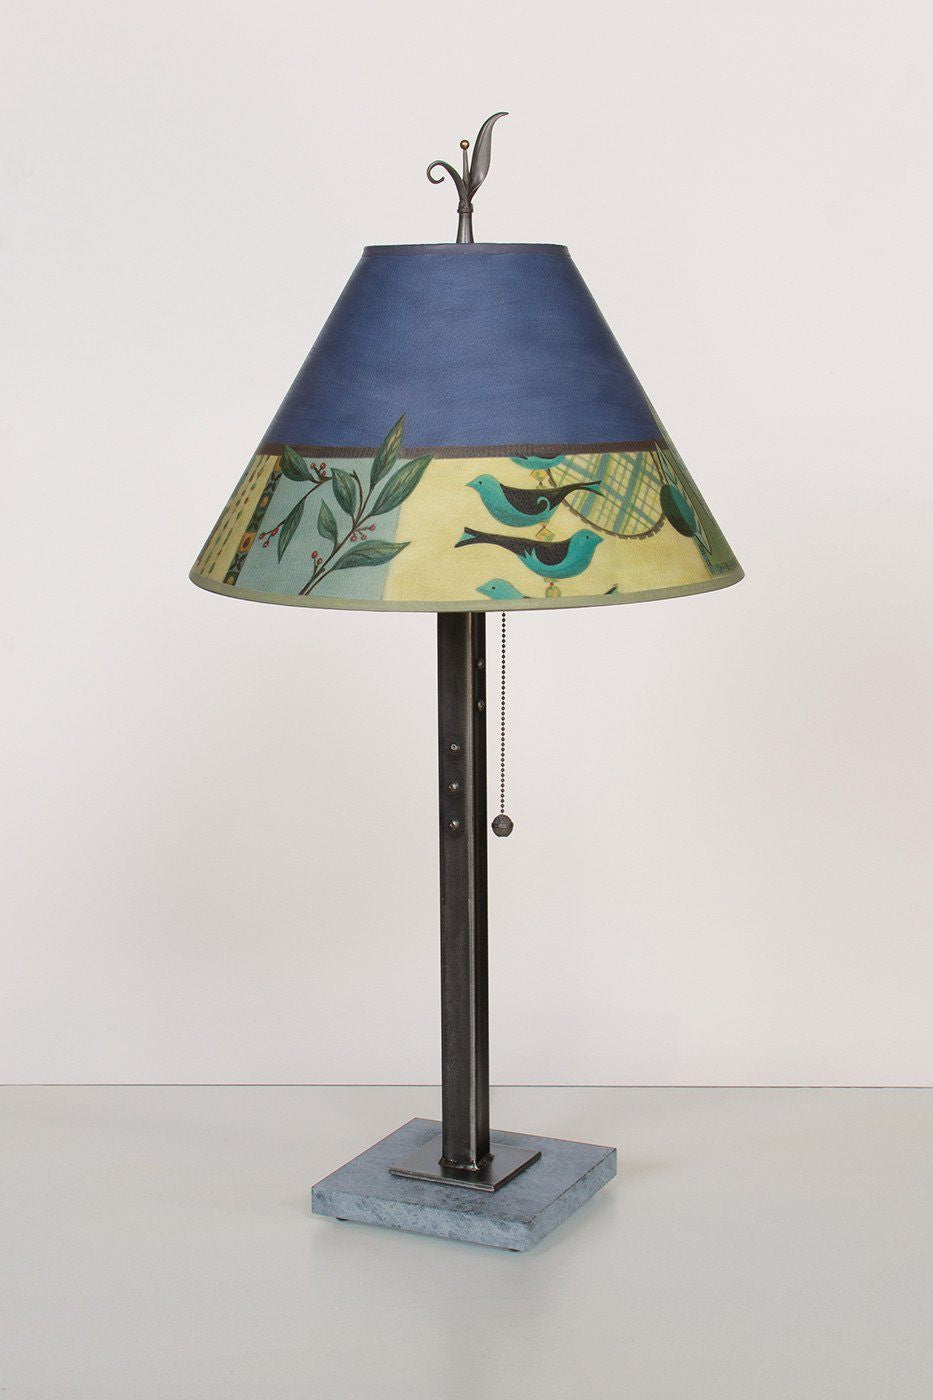 Steel Table Lamp on Marble with Medium Conical Shade in New Capri Periwinkle